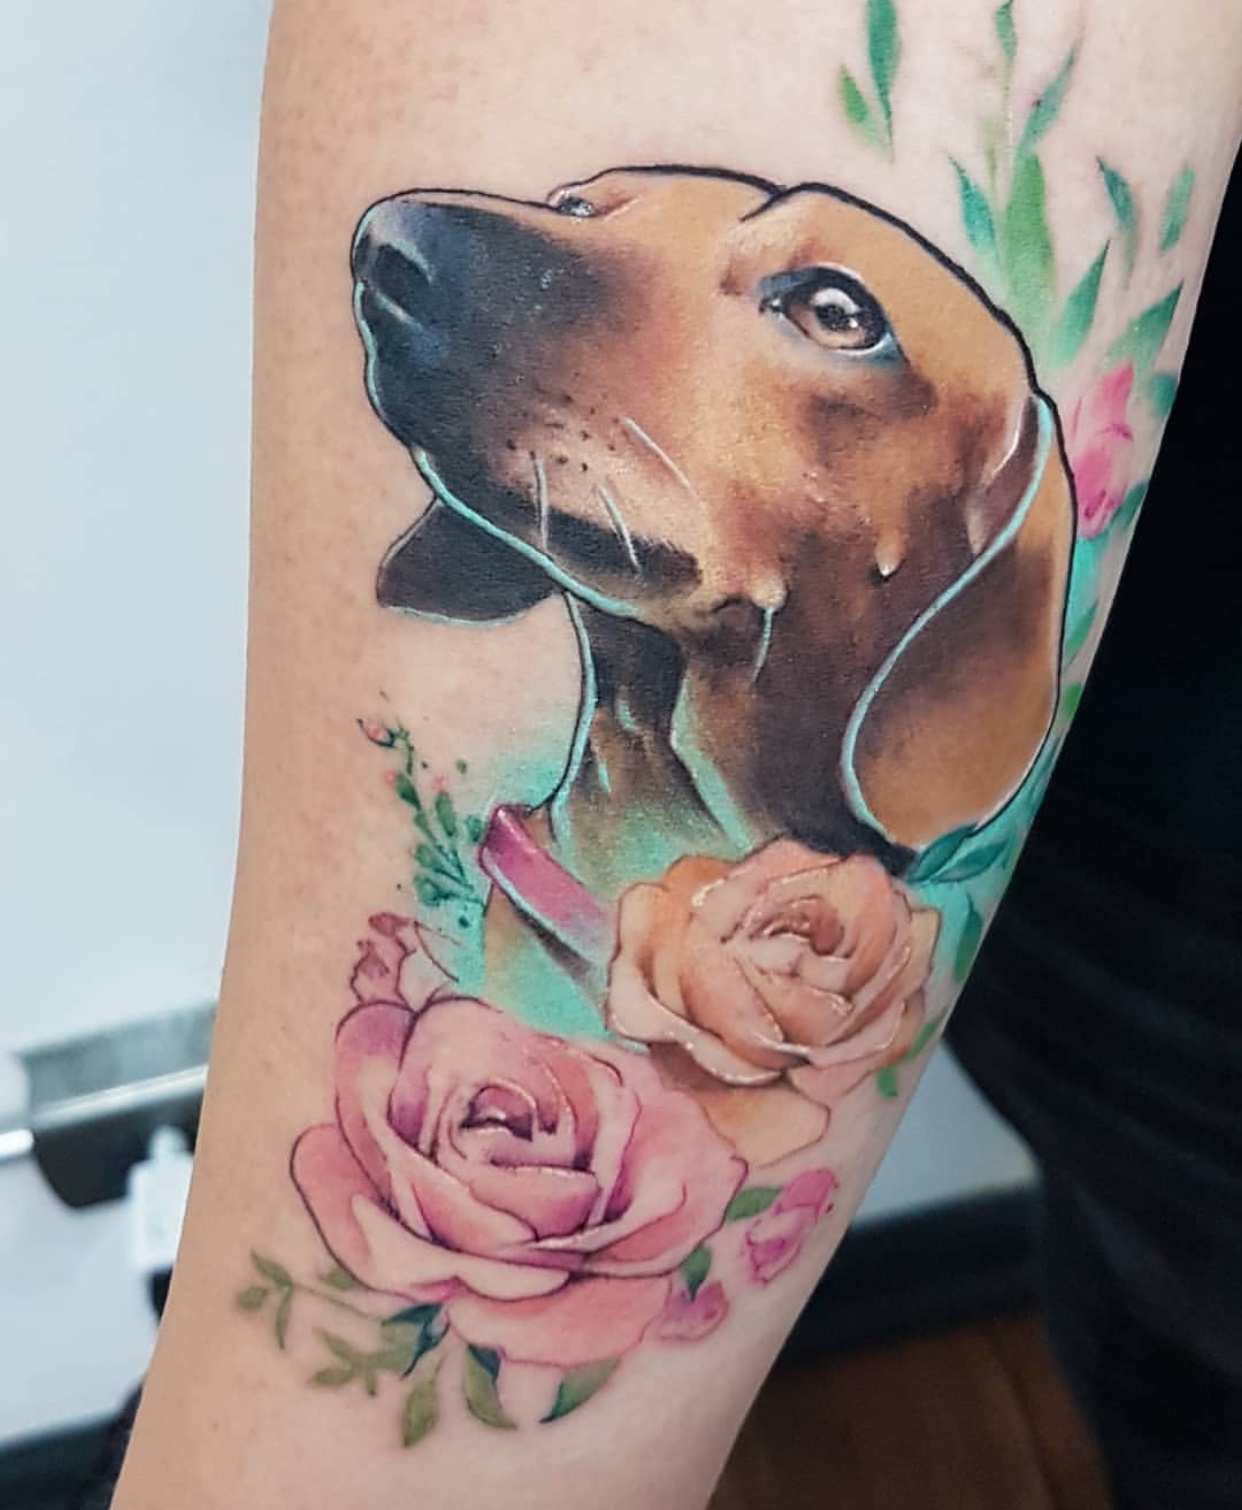 brown Dachshund with flowers tattoo on wrist